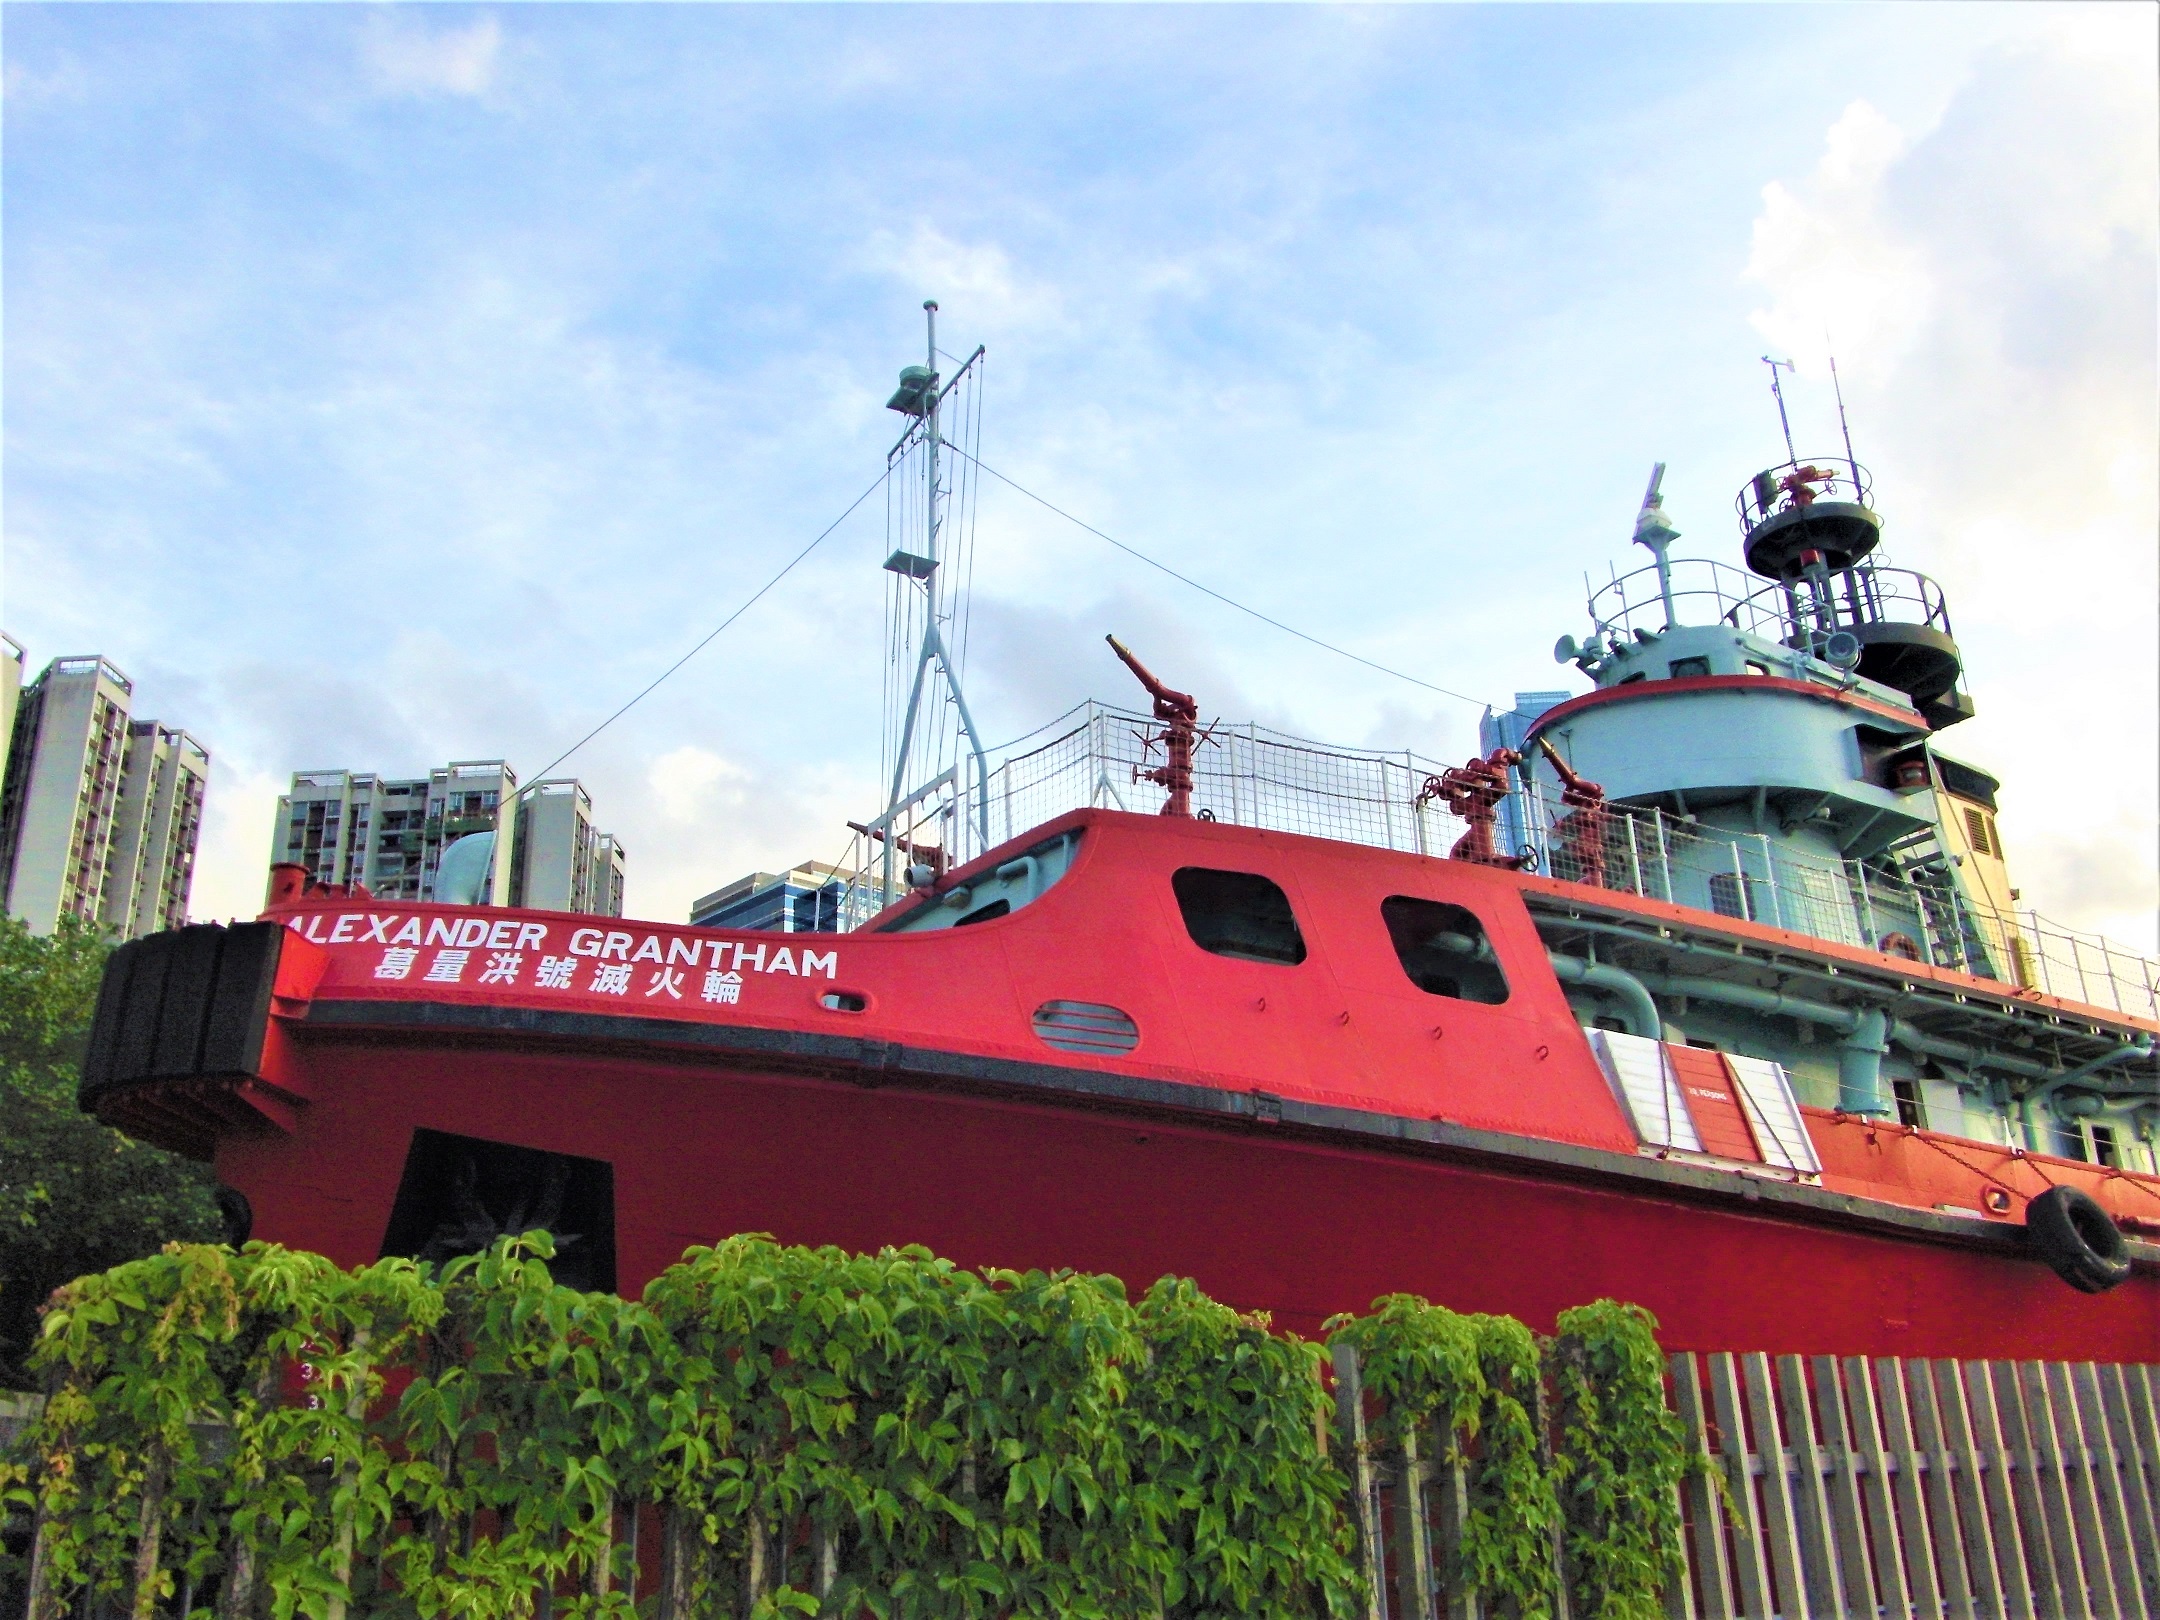 Alexander Grantham Fireboat joined the mission to put out the fire of jumbo in 1971. Now it is a museum.